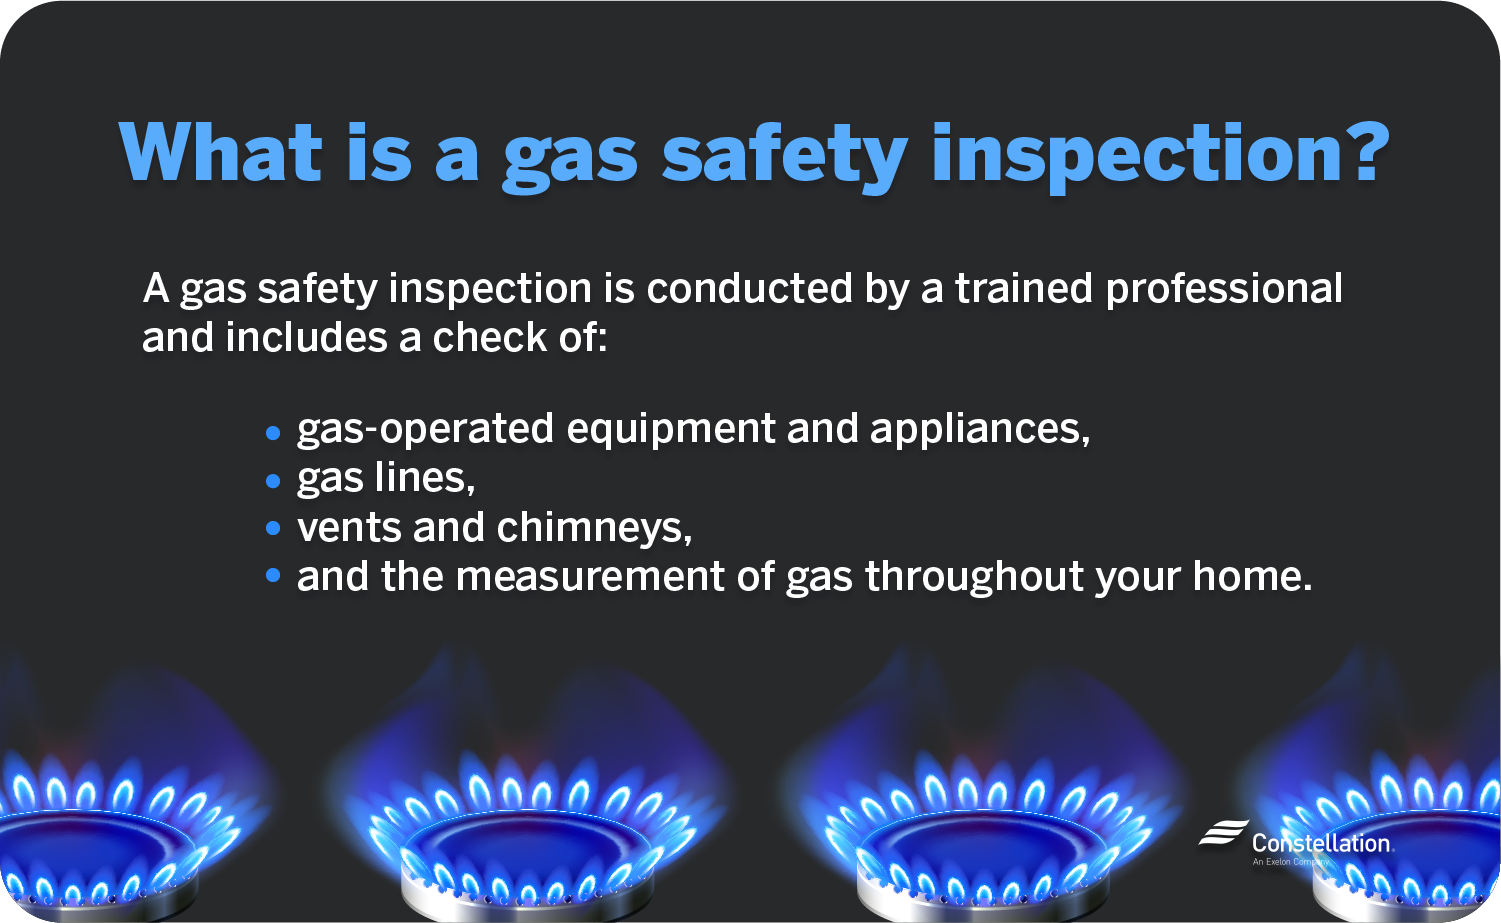 What is a gas safety inspection?